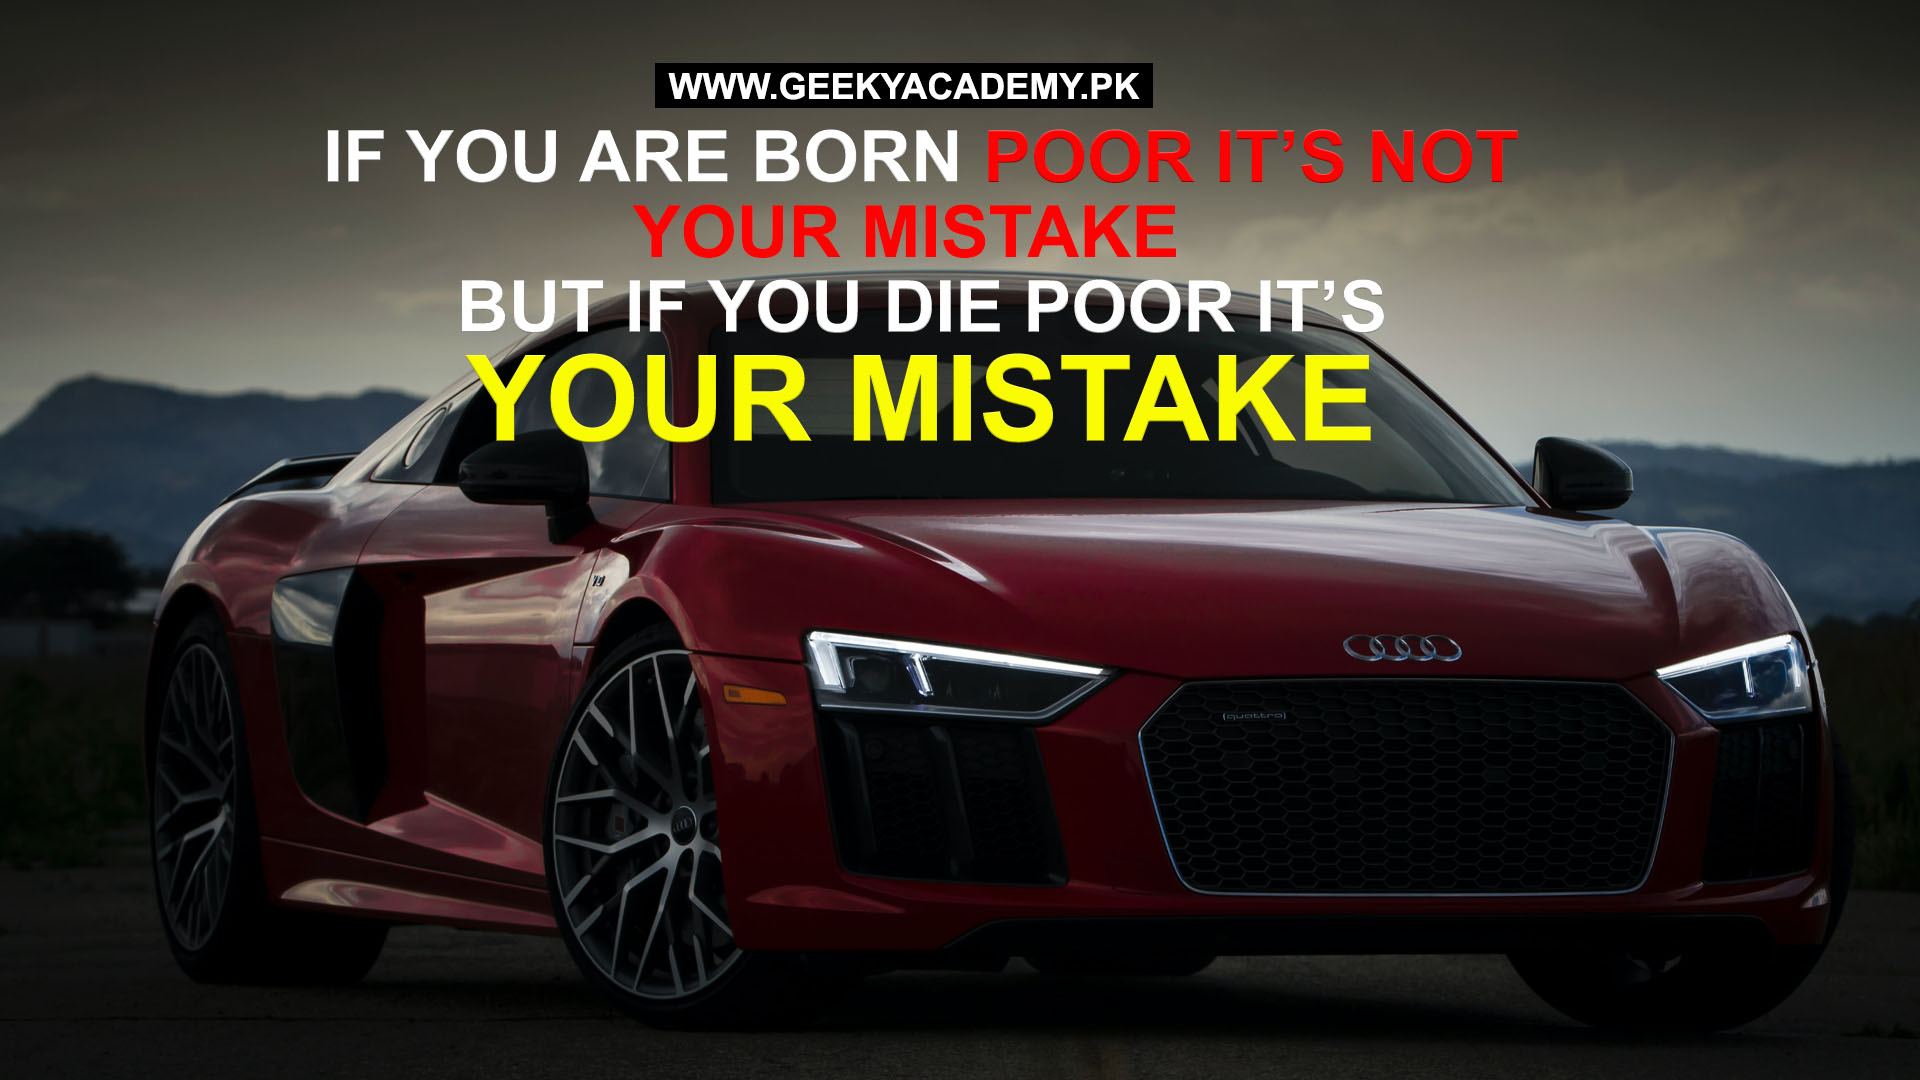 motivational quotes - If you are born poor it’s not your mistake but if you die poor its your mistake.